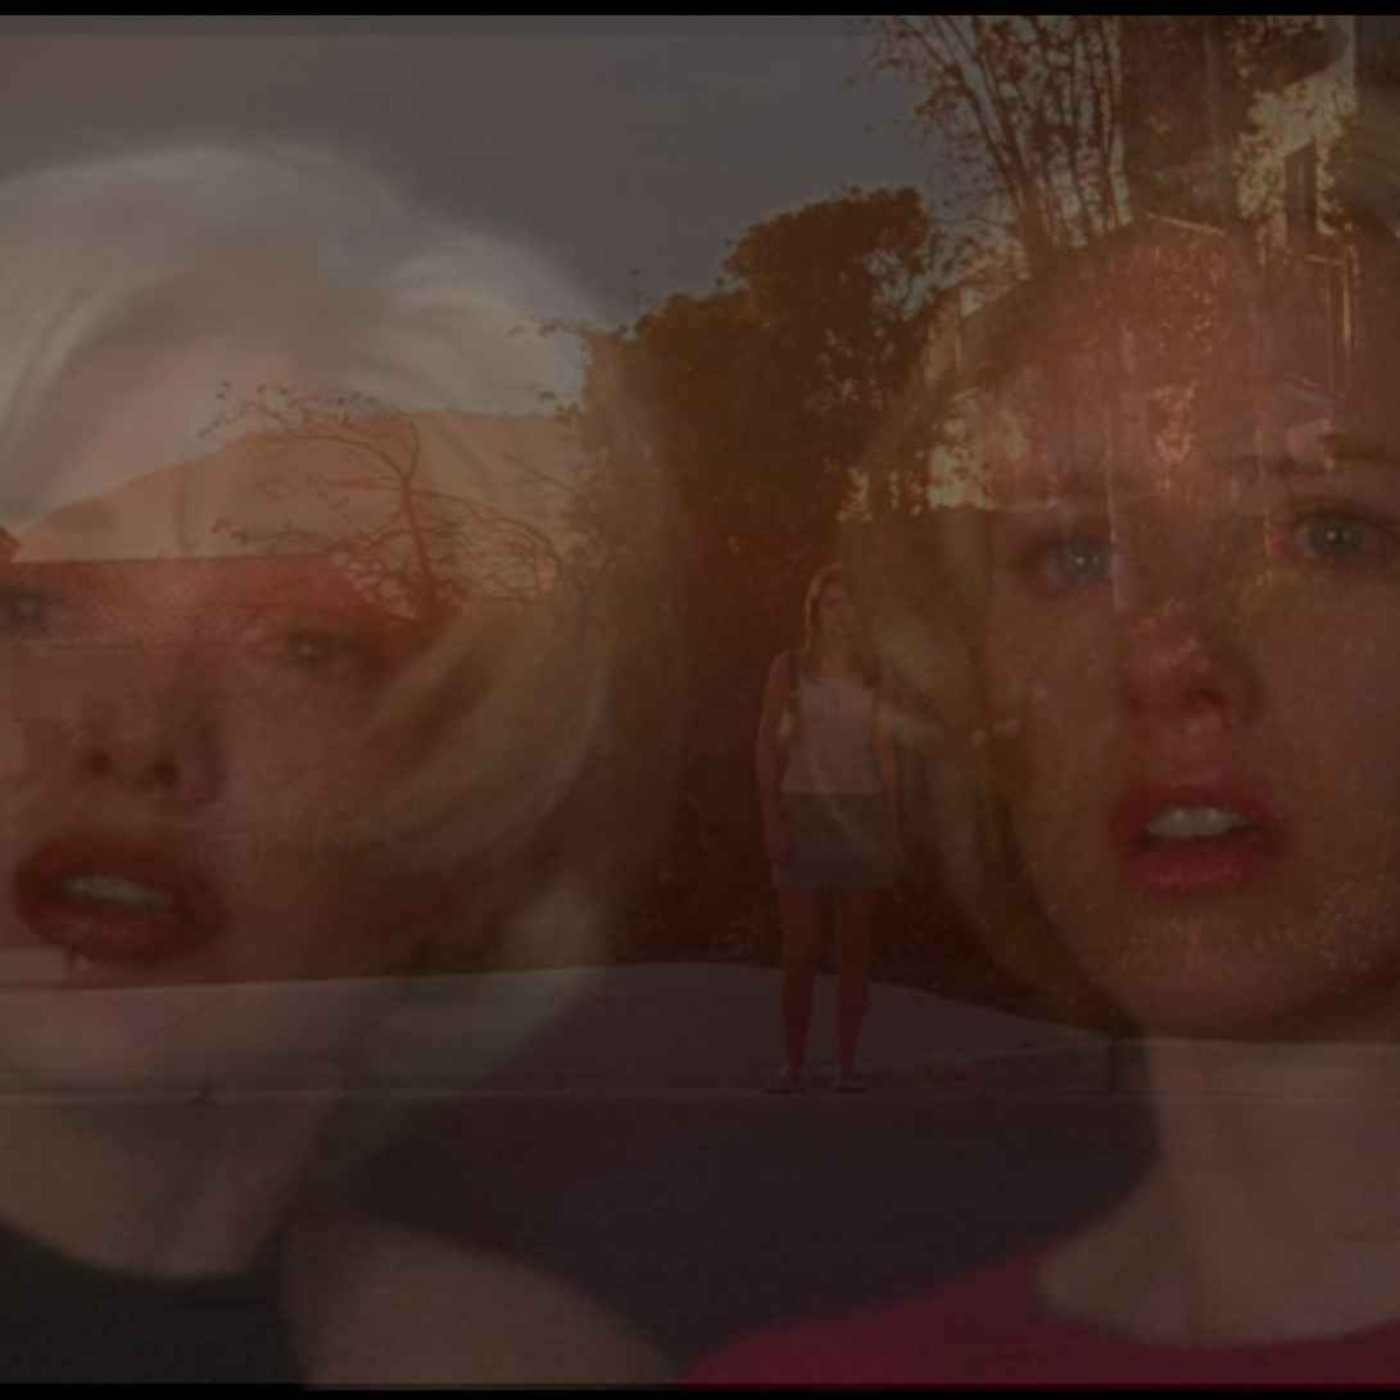 cover art for Episode 11: Mulholland Drive (2001, David Lynch), and The O.C. pilot (2003, Doug Liman)